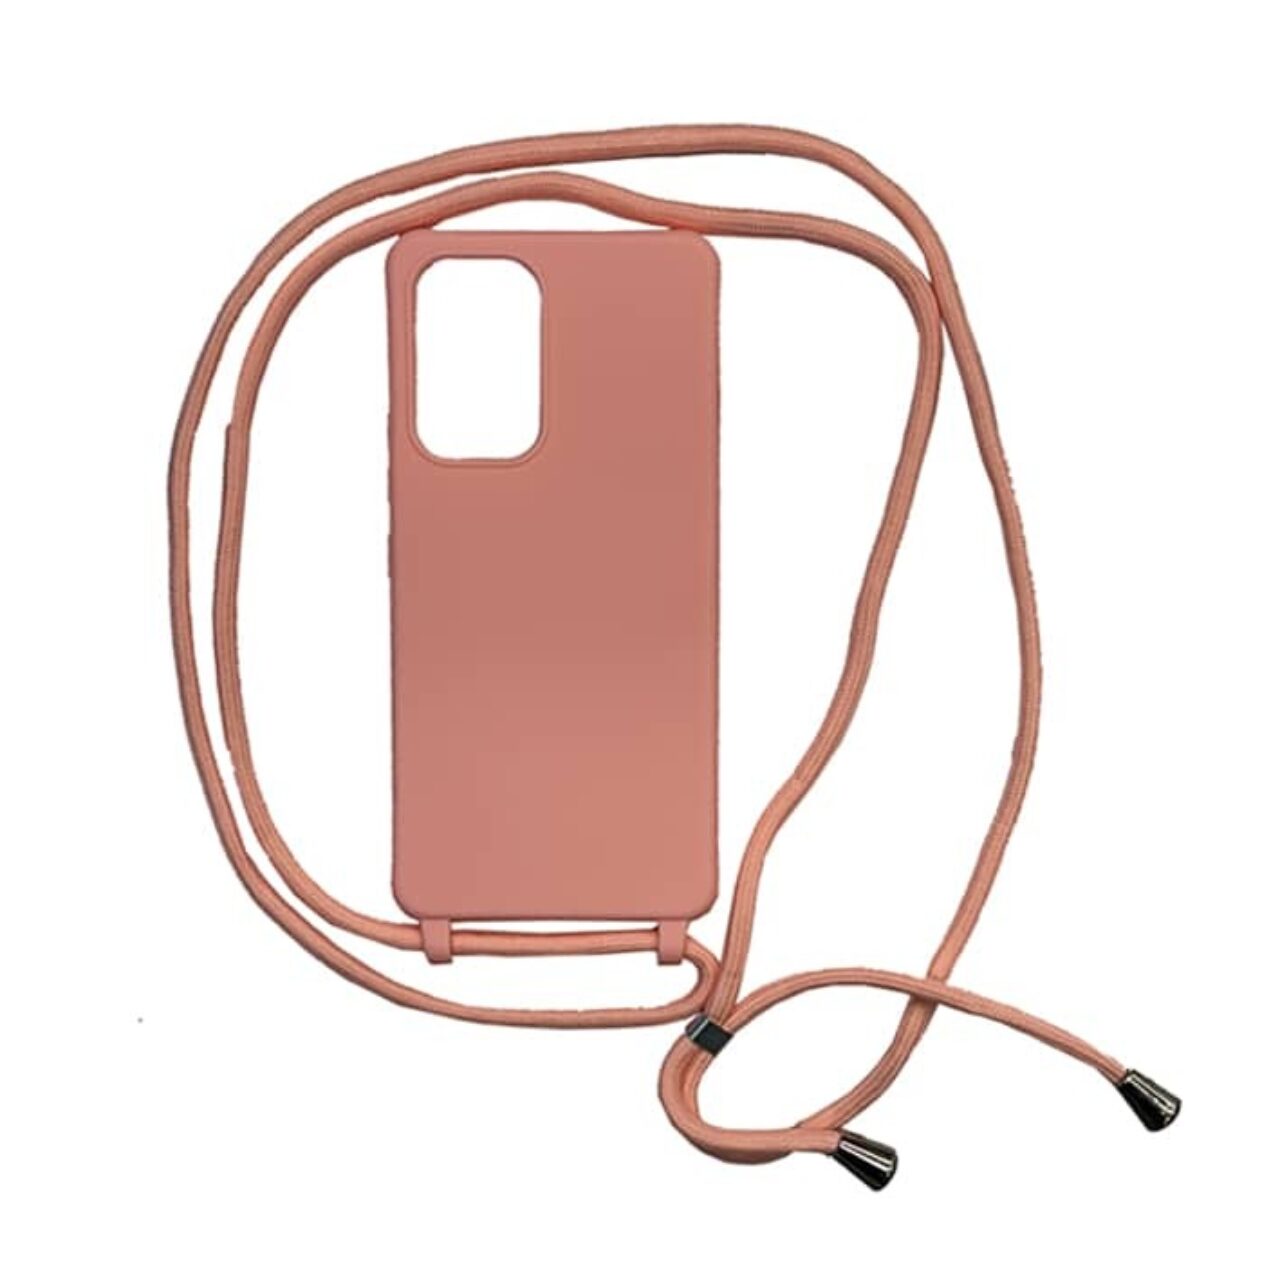 TPU Case With Cord for A53 A52 A33 A72 A71 PINK